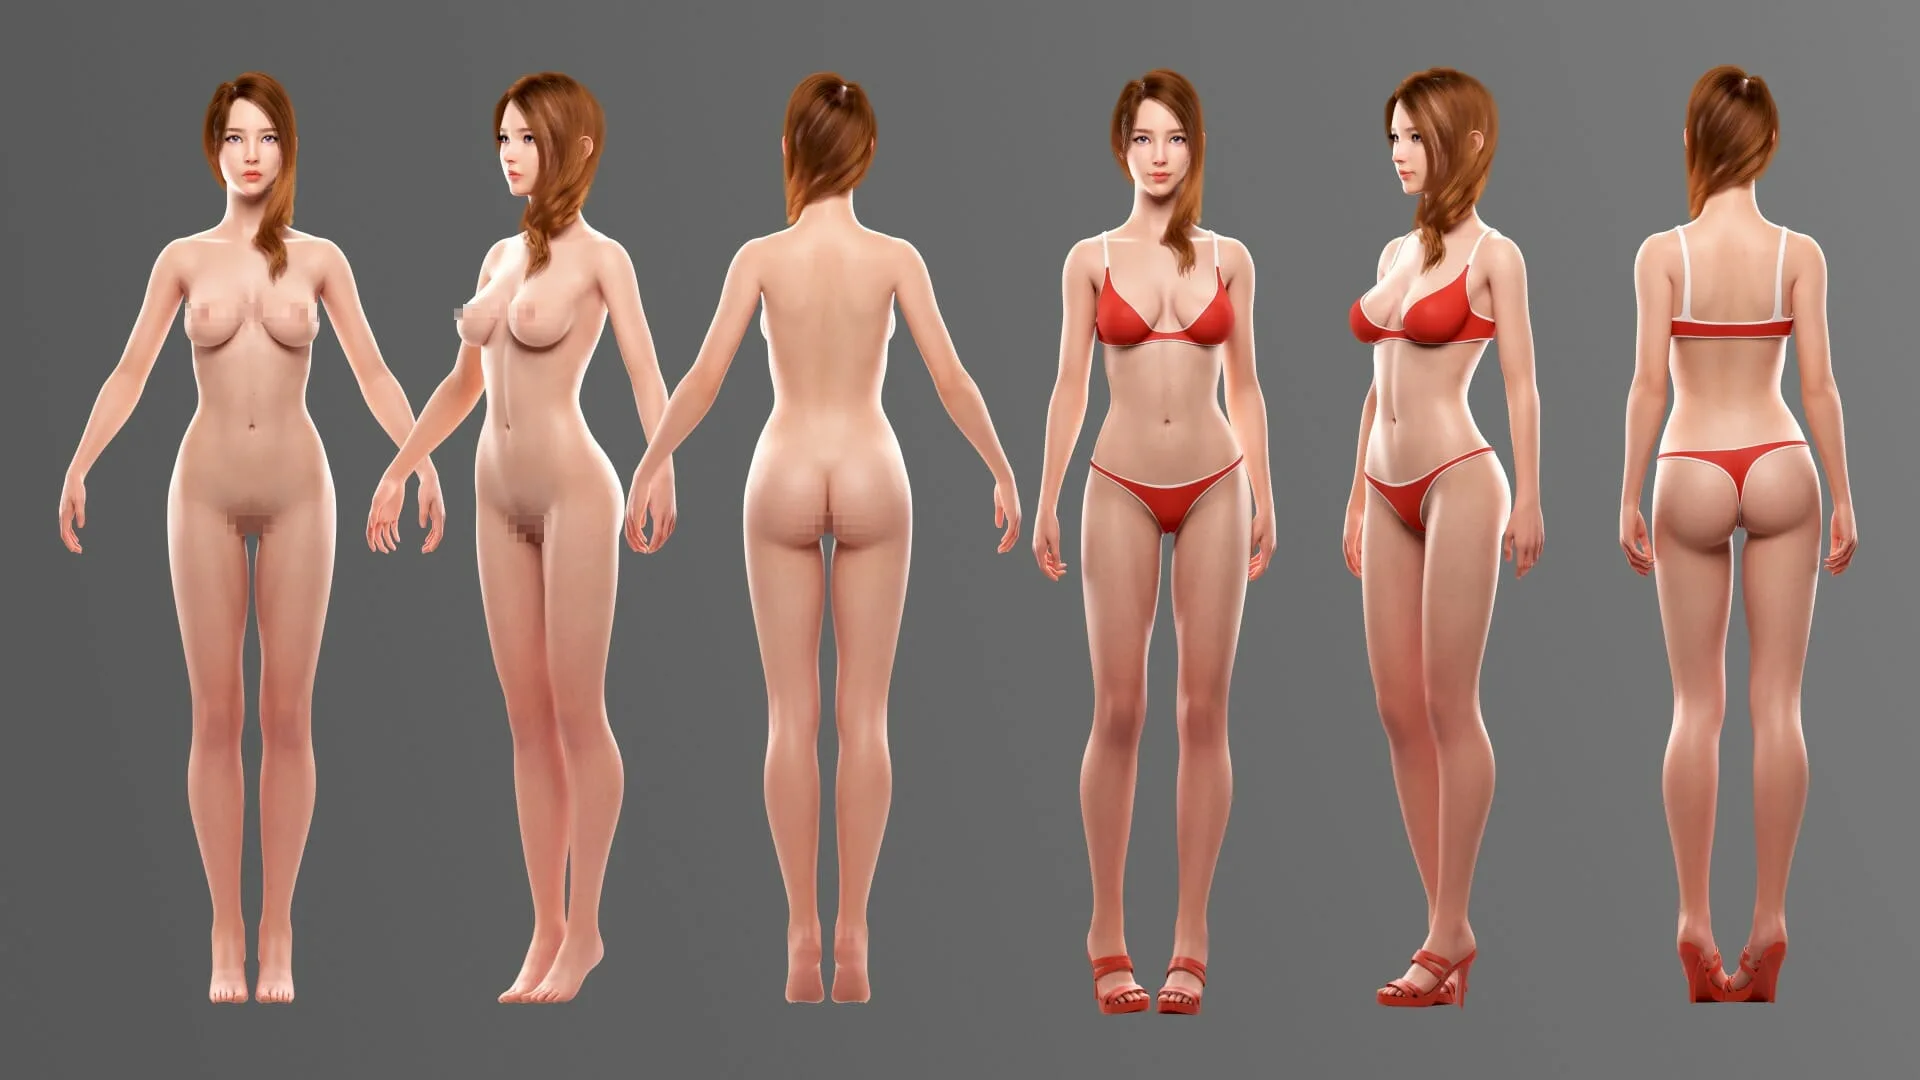 AVA - Rigged Female Character